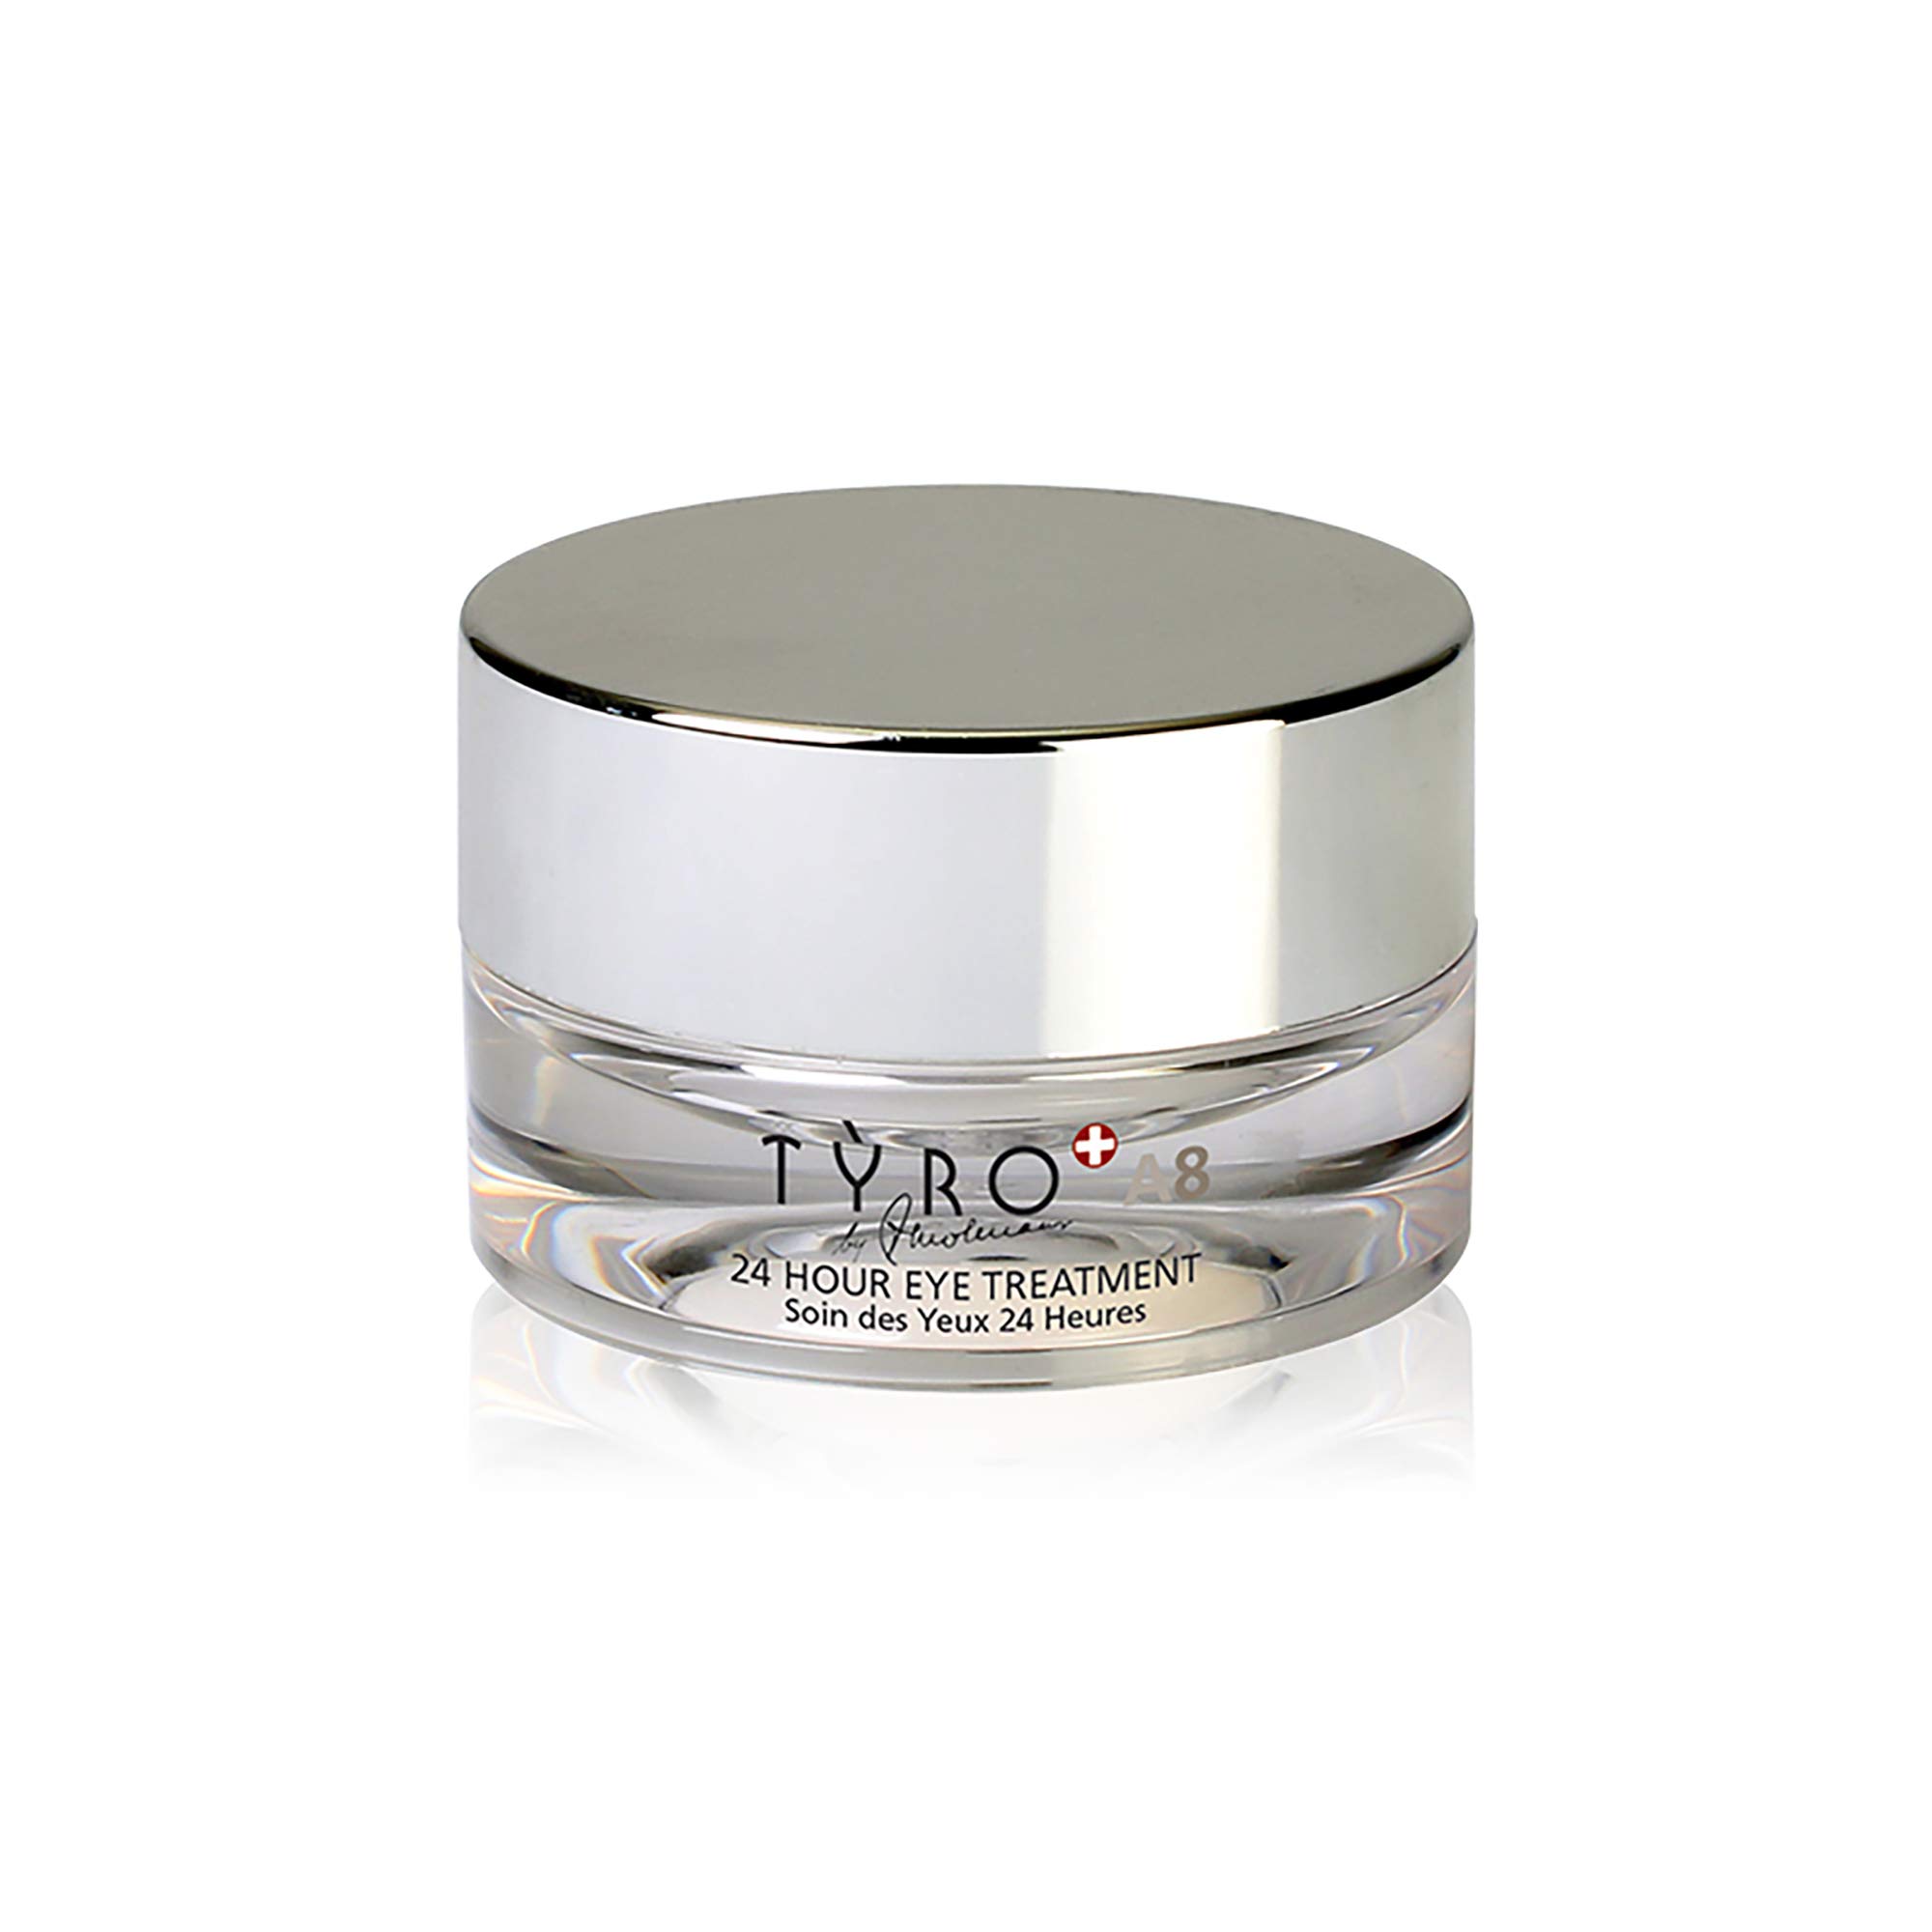 TYRO 24 Hour Eye Treatment - Specifically Designed For The Eye Area - Combats Free Radicals And Visible Signs Of Ageing - Helps Skin Retain Moisture - Suitable For All Skin Types - 0.51 Oz